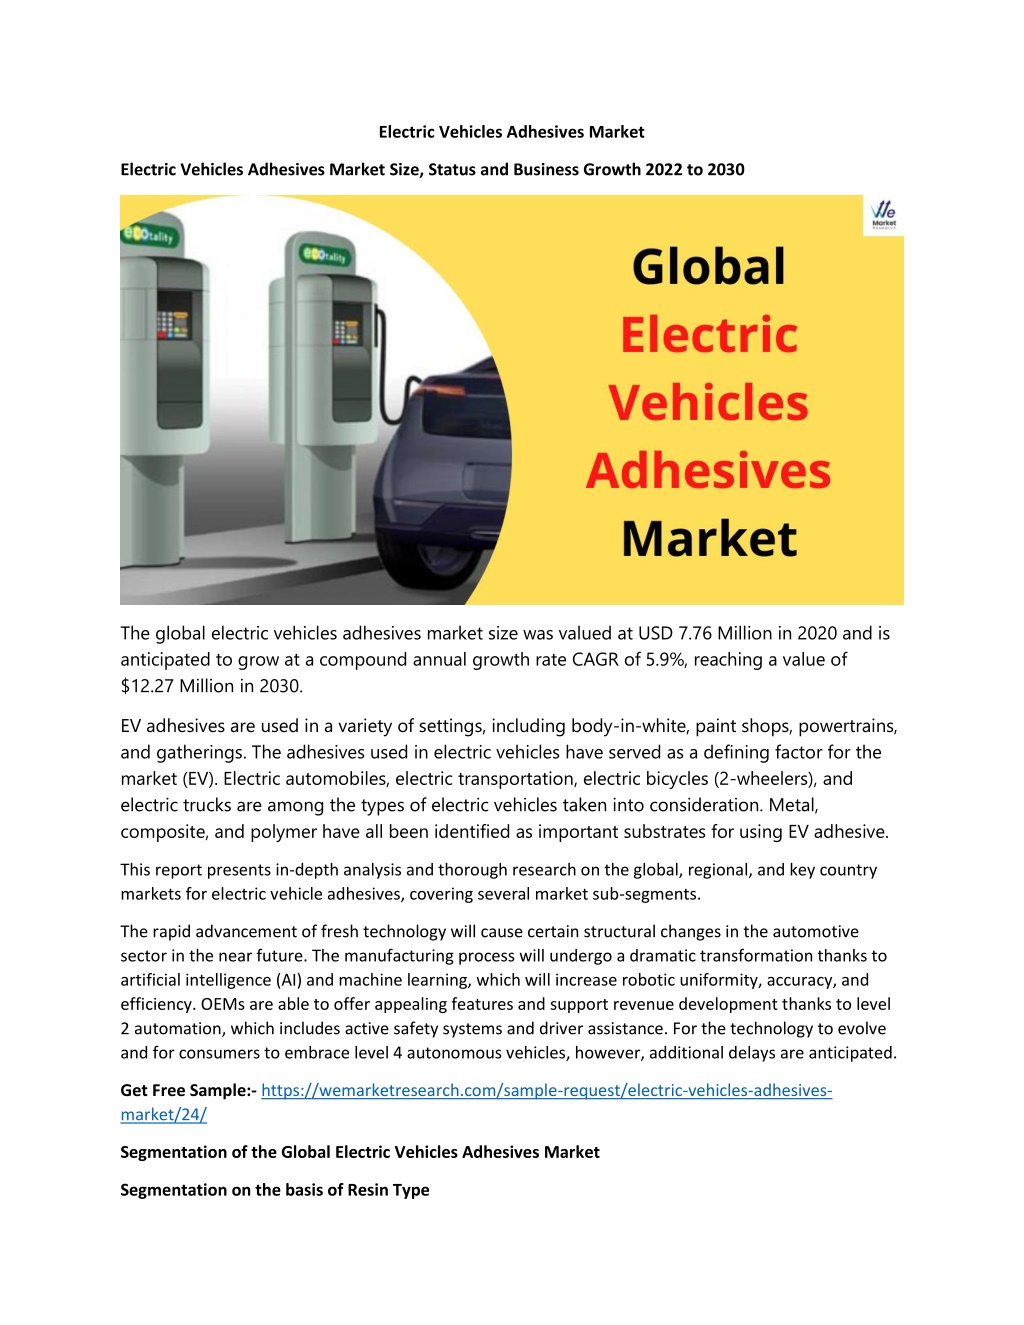 PPT Electric Vehicles Adhesives Market Size, Status and Business